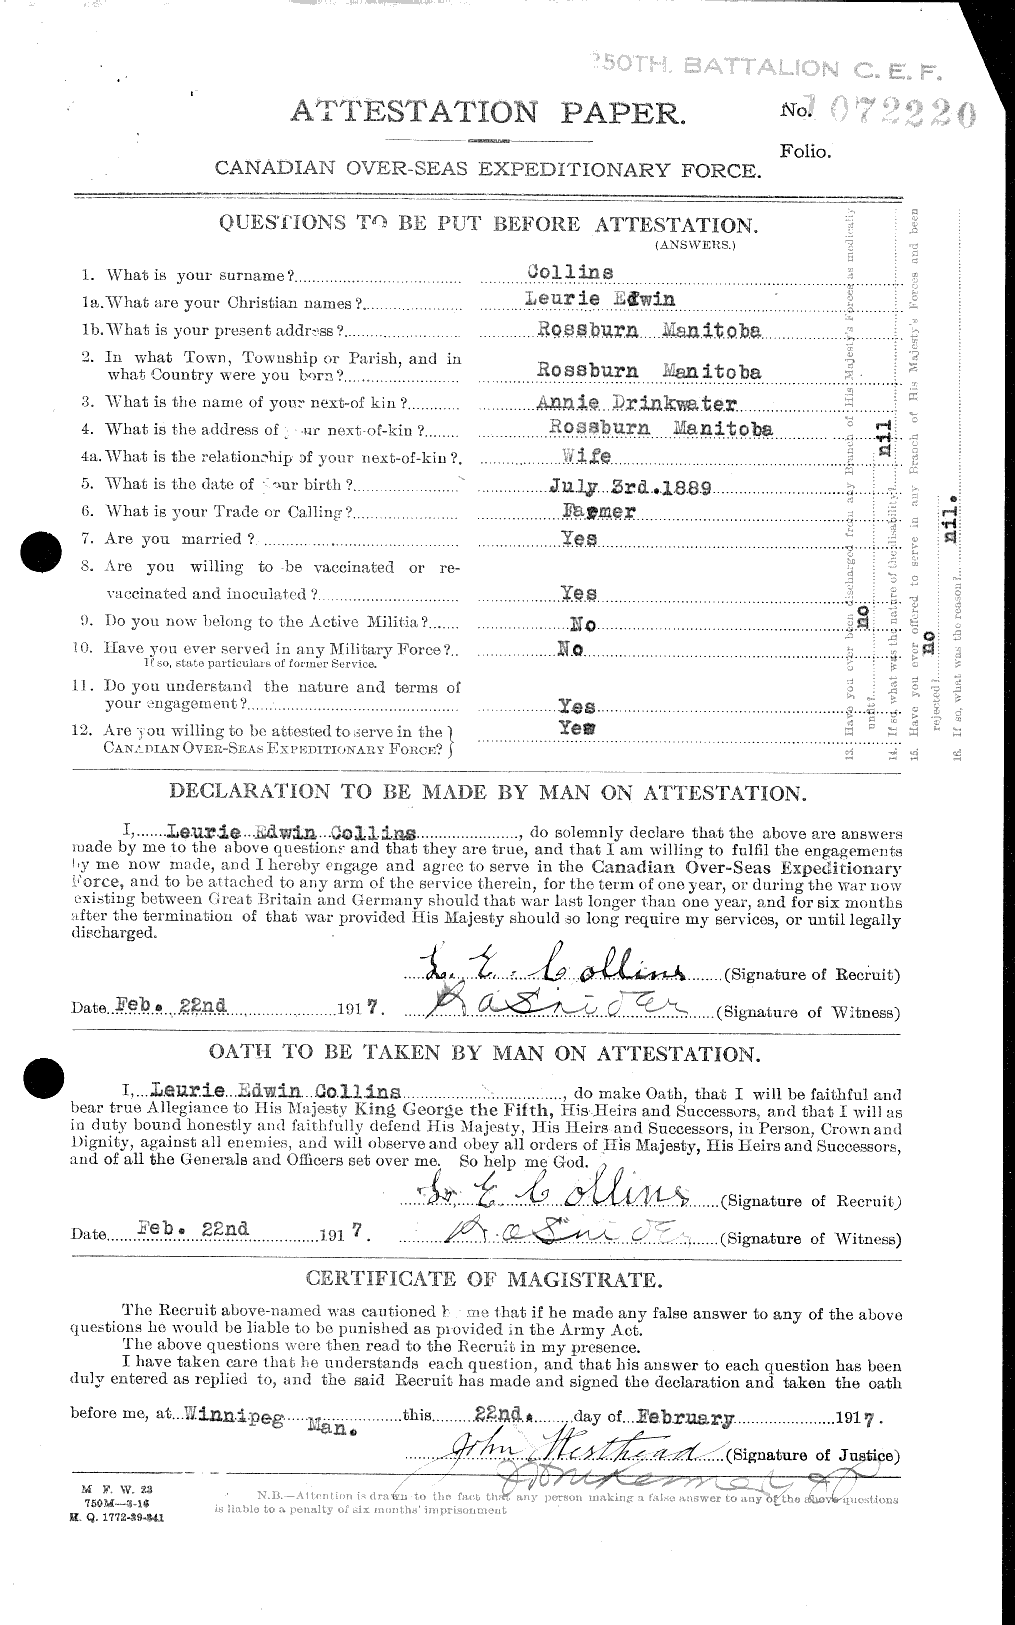 Personnel Records of the First World War - CEF 034452a